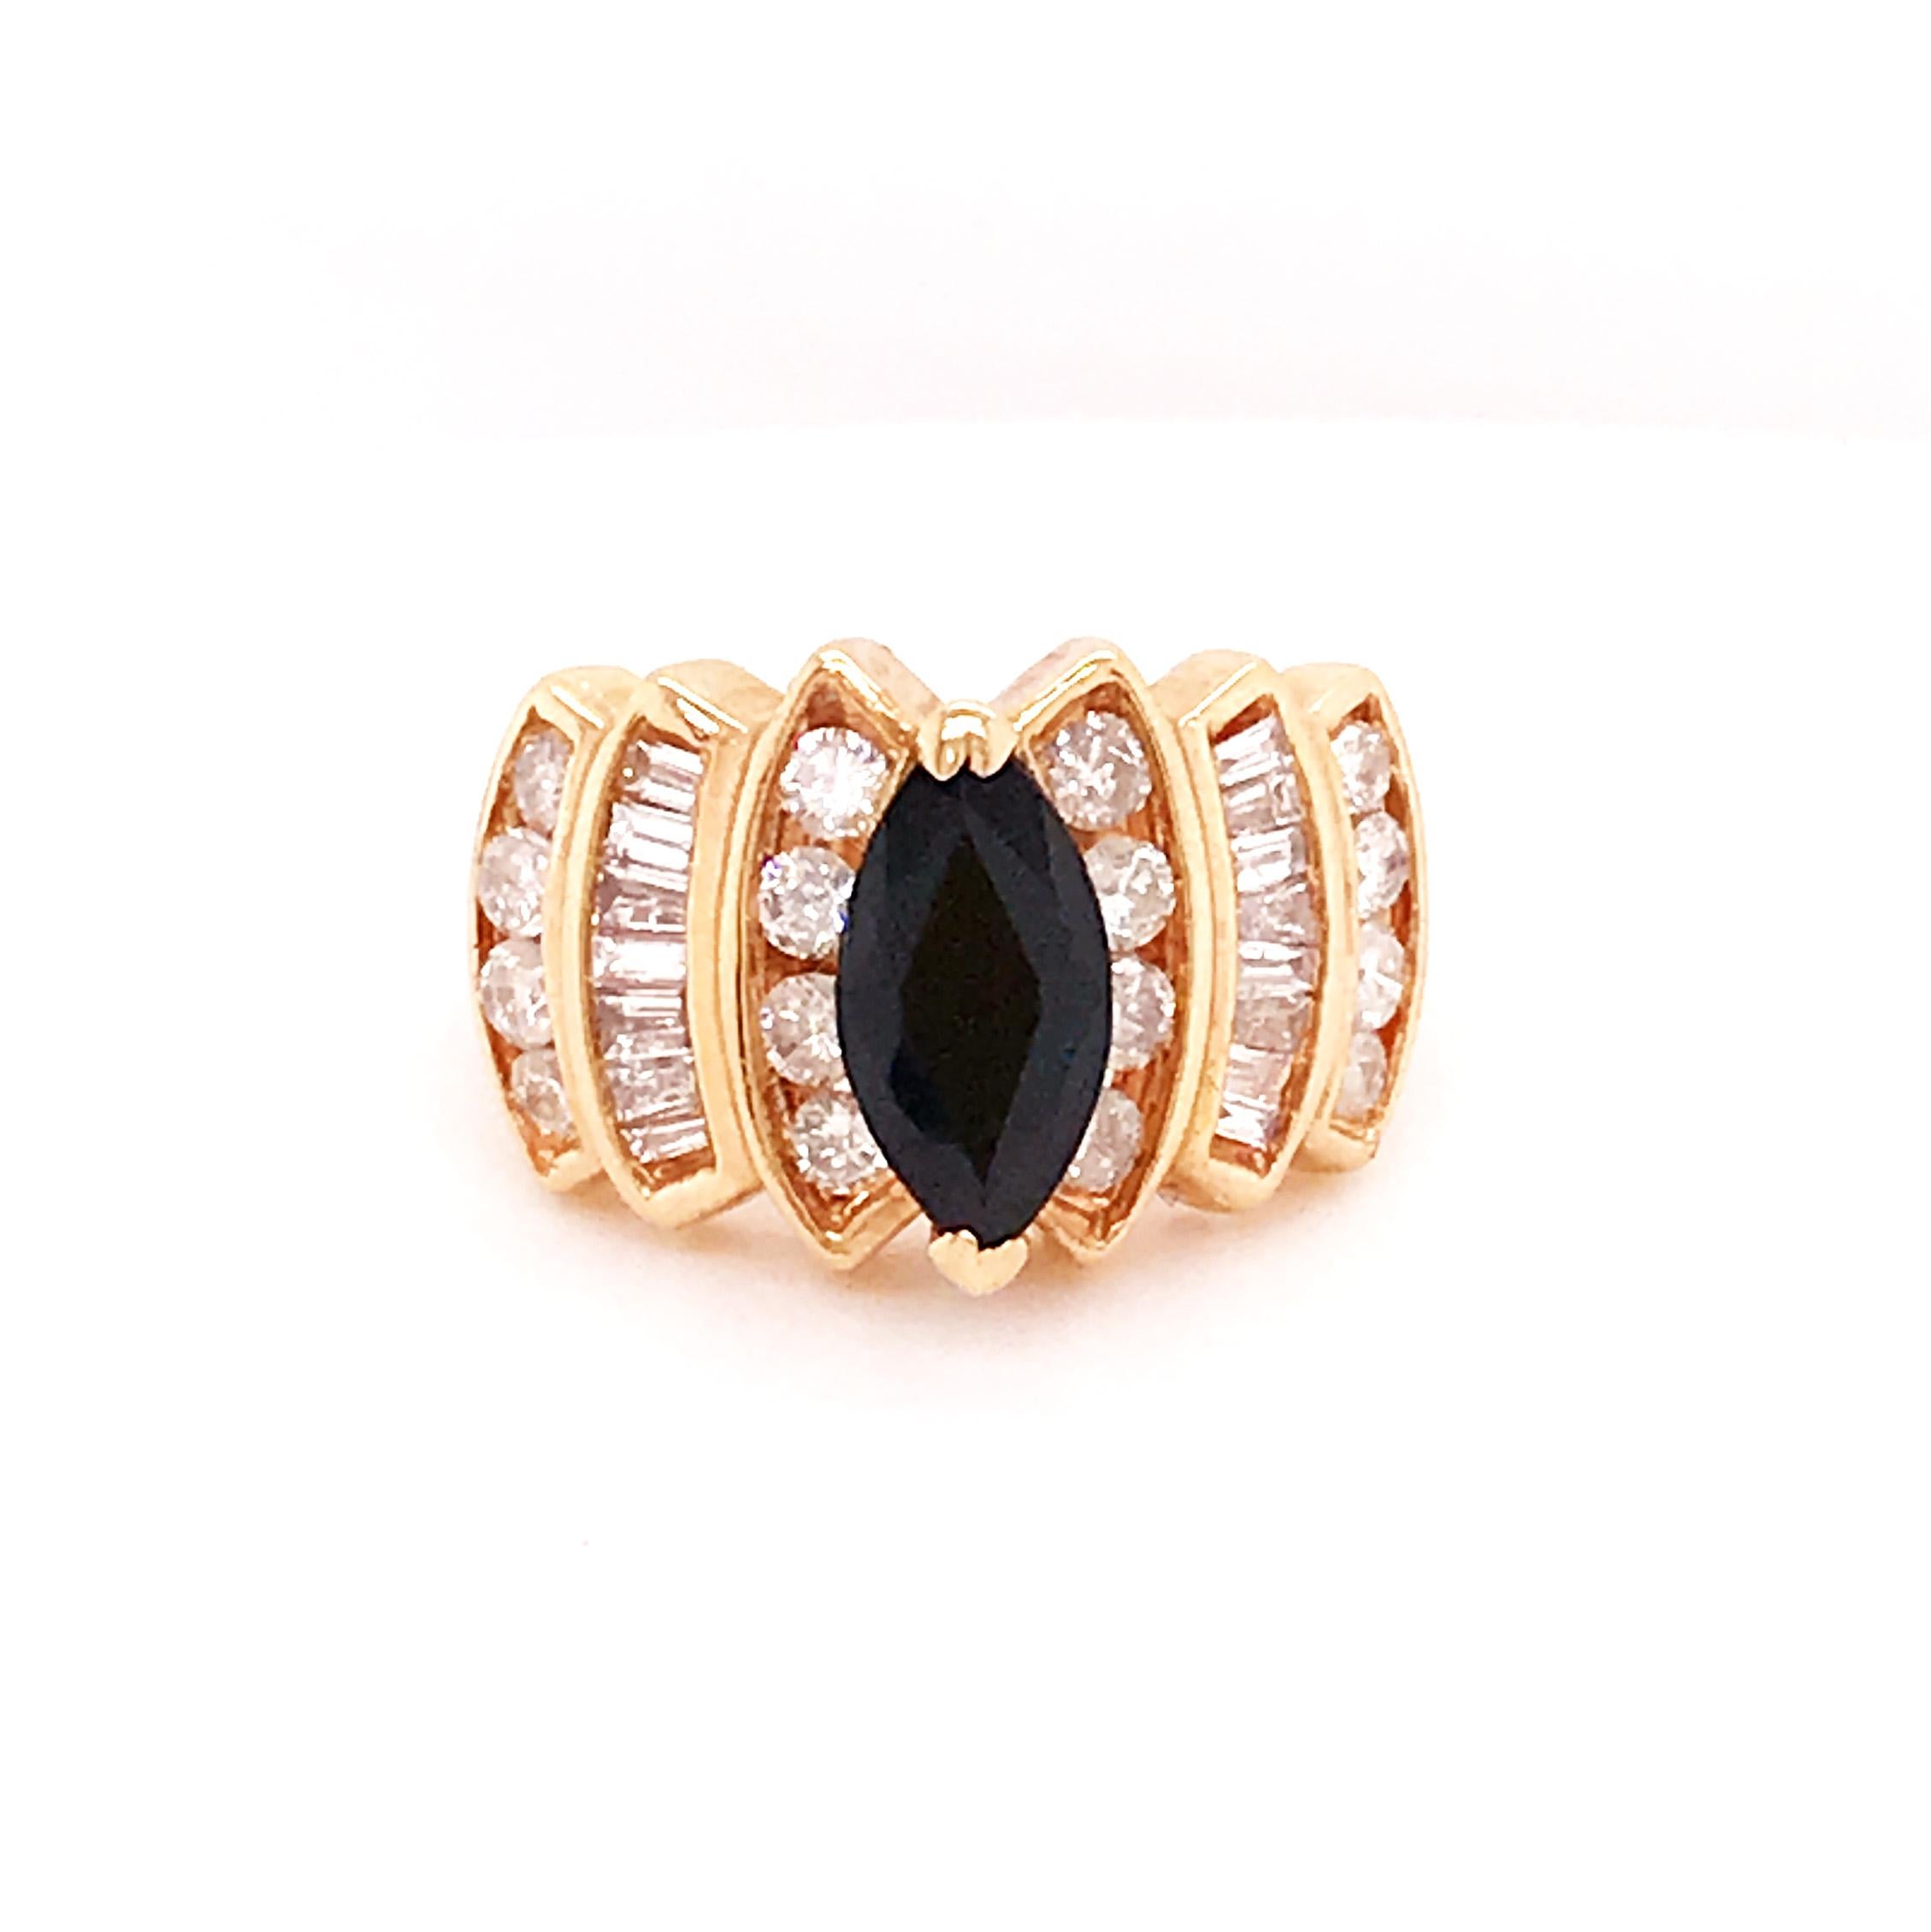 Custom Estate Sapphire and Diamond Ring. With a marquise shaped, genuine, deep blue sapphire gemstone set in a secure 